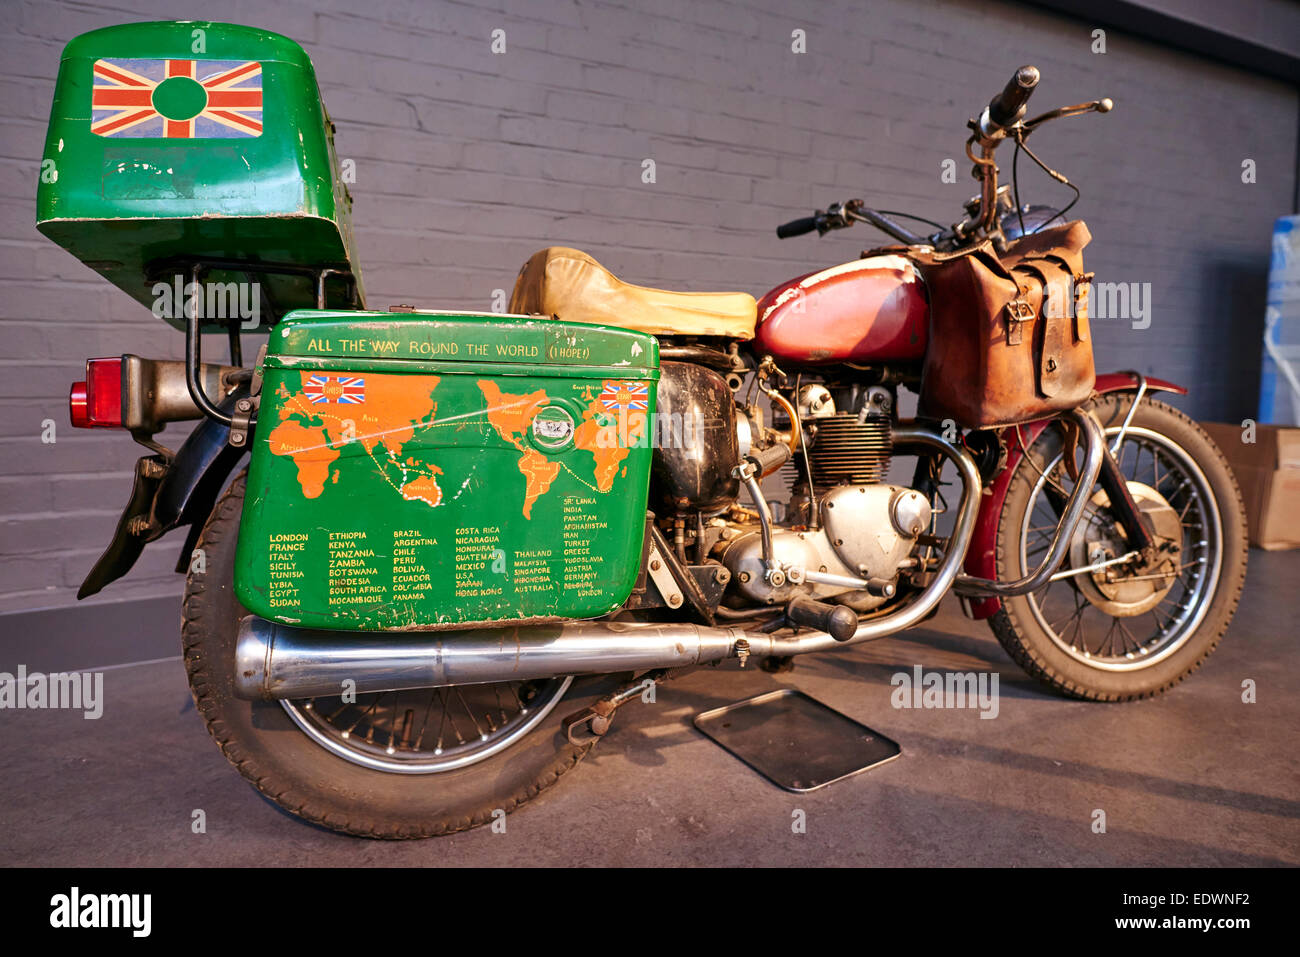 1974 Triumph Tiger 100 Motorcycle Known As The Transworld Trumpet Used By Ted Simon On His Round World Trip Stock Photo